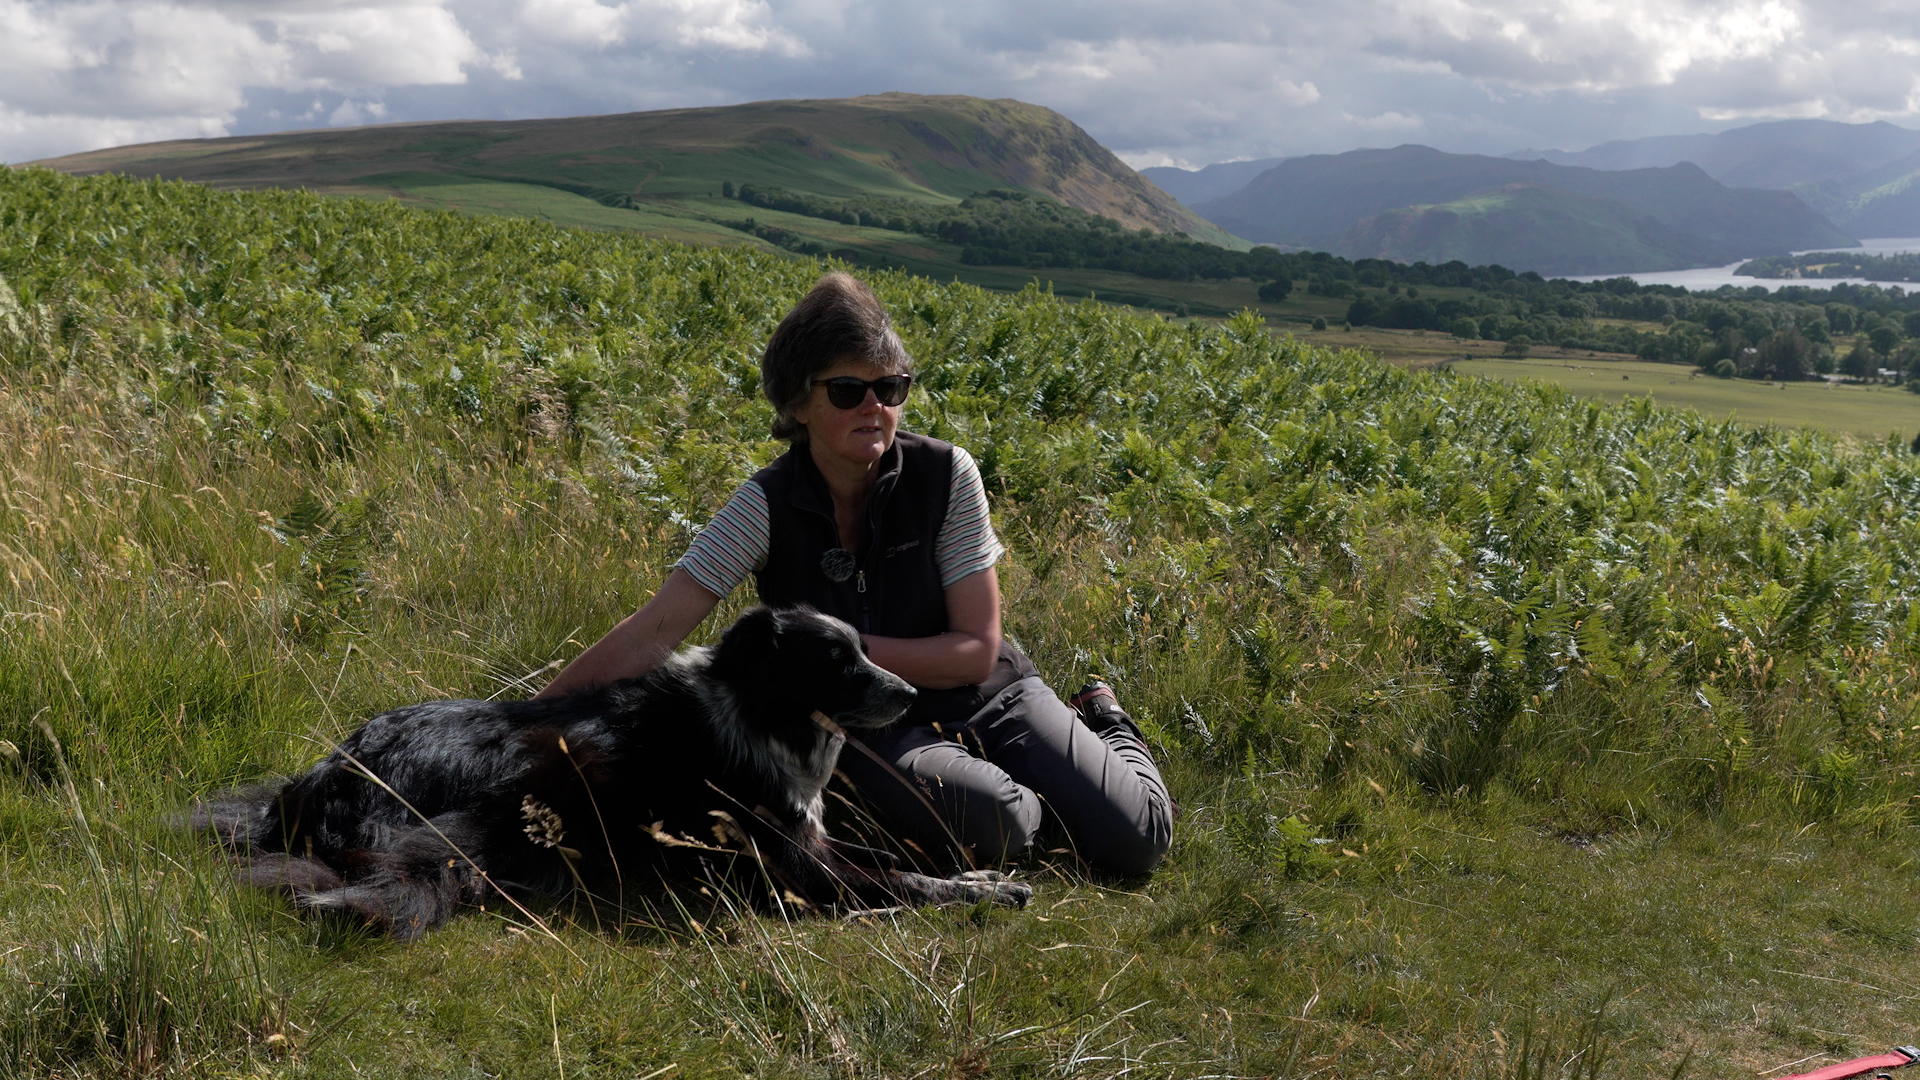 A woman sits with her dog on a grassy hillside, with hills and a lake in the distance